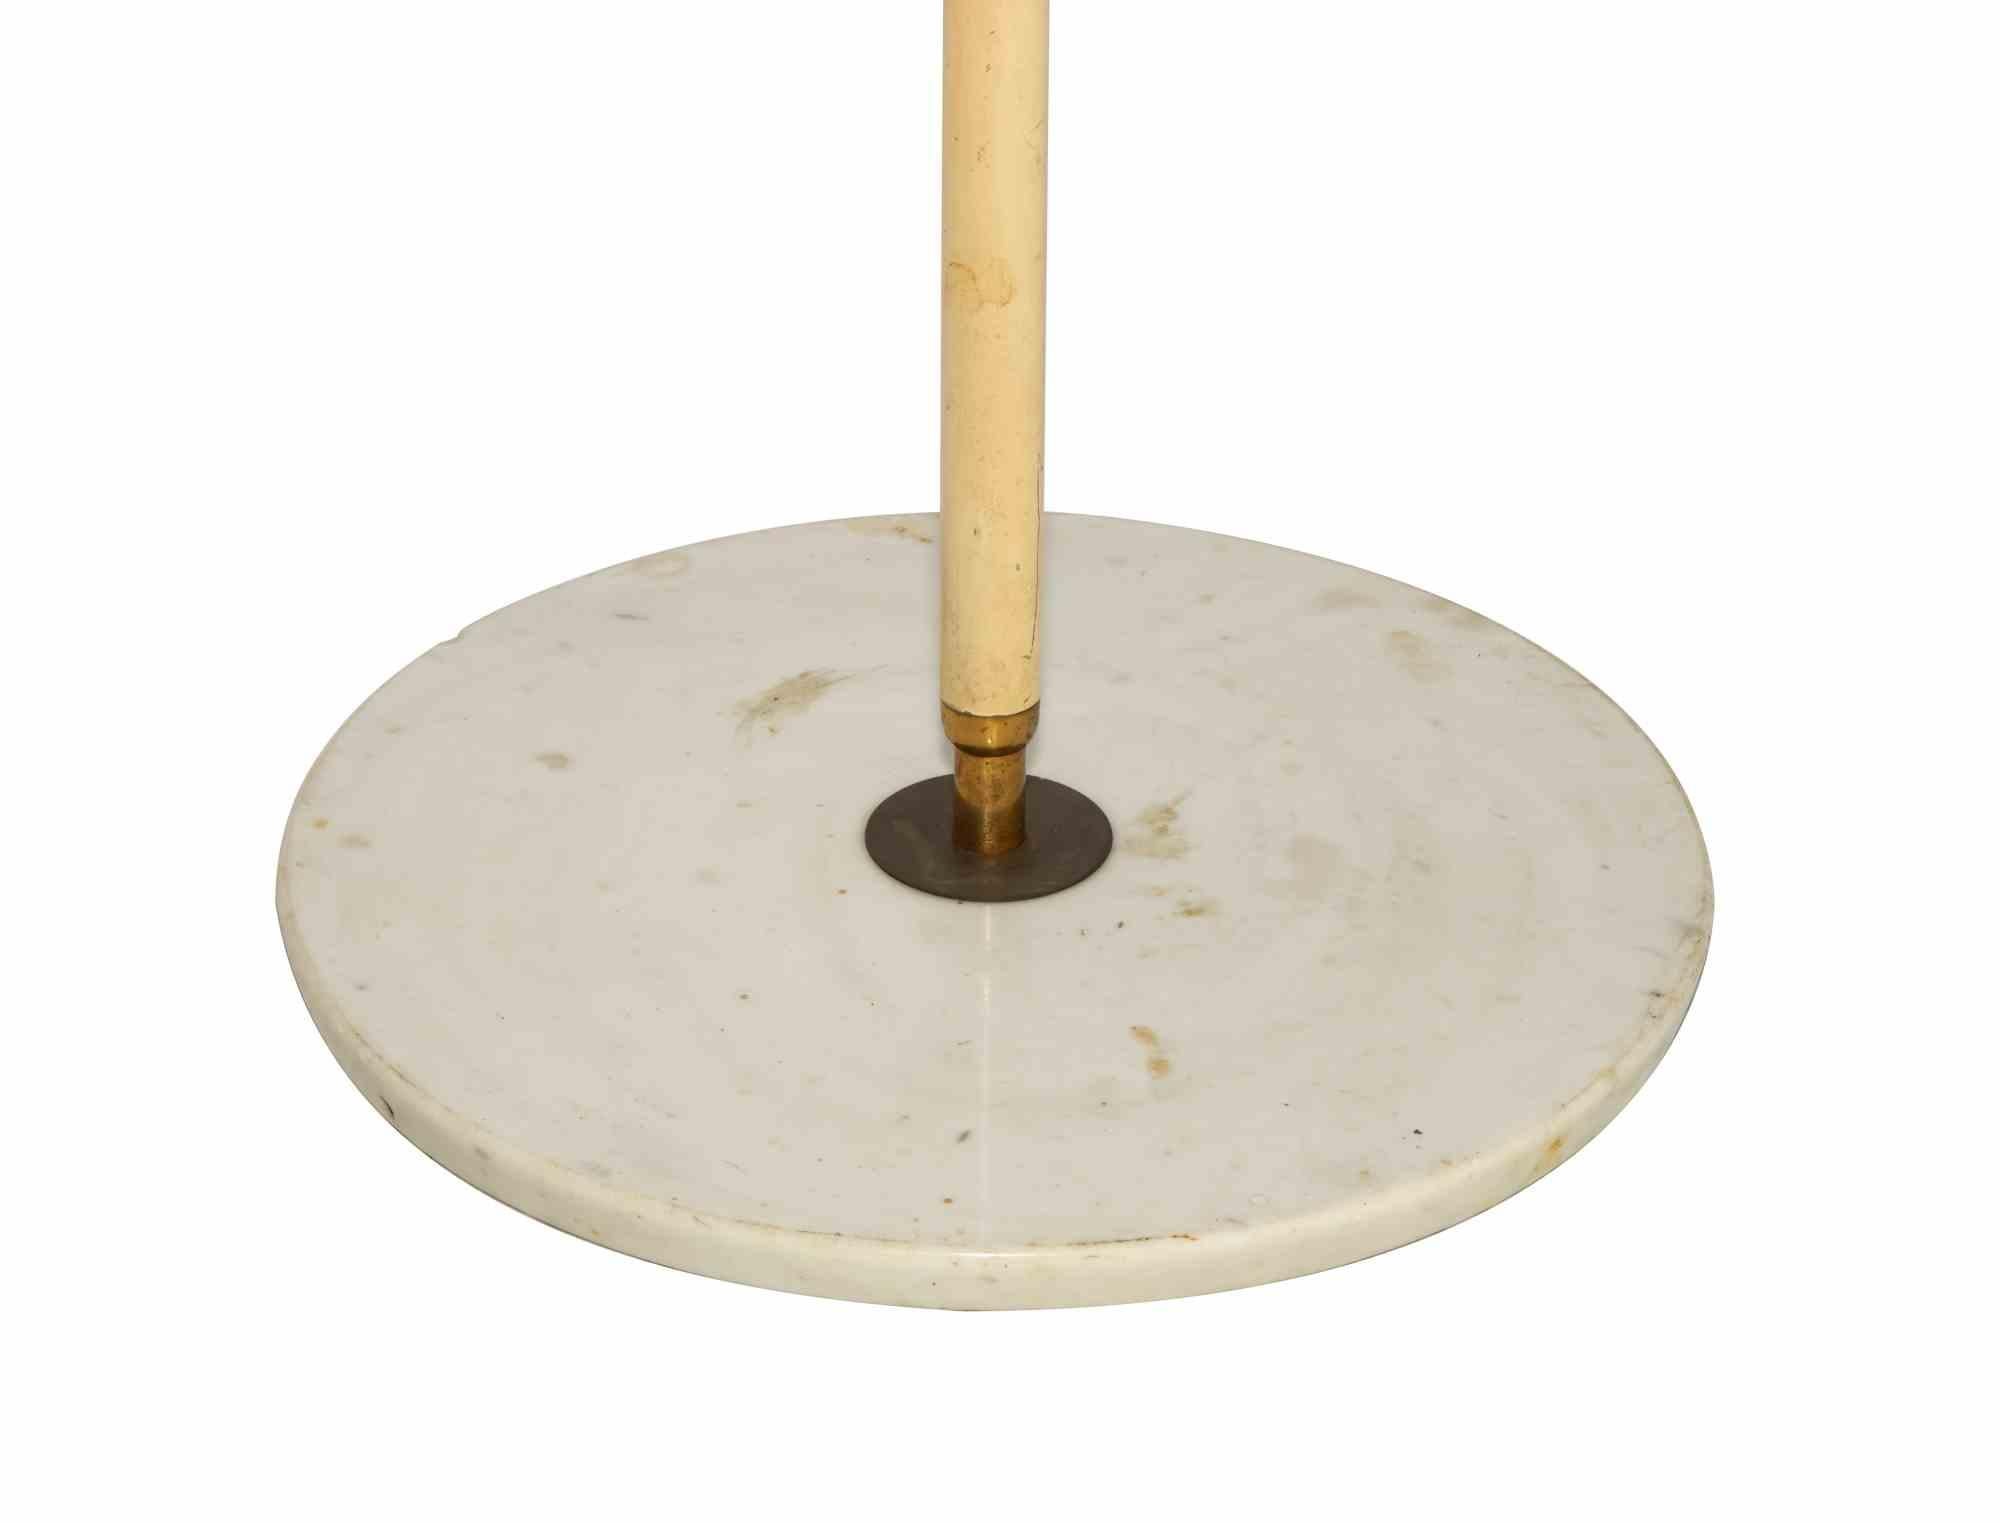 Rare early 1950s adjustable Italian floor lamp marked Stilnovo, with red enameled shade and handle. Articulated brass arm on enameled metal pole and round Carrara marble base.